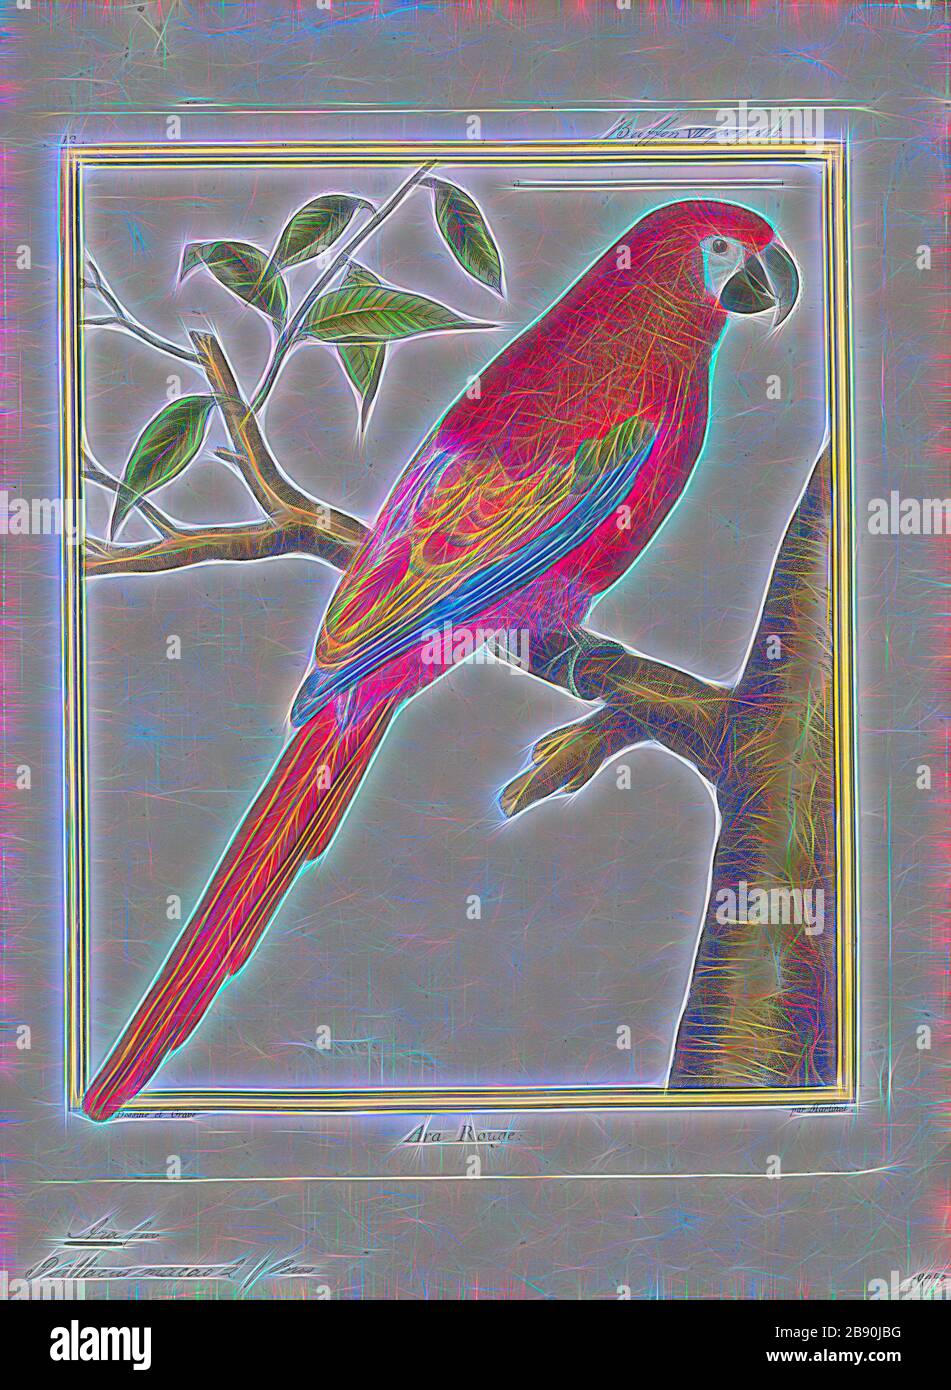 Ara macao, Print, The scarlet macaw (Ara macao) is a large red, yellow, and blue Central and South American parrot, a member of a large group of Neotropical parrots called macaws. It is native to humid evergreen forests of tropical Central and South America. Range extends from south-eastern Mexico to the Peruvian Amazon, Colombia, Bolivia, Venezuela and Brazil in lowlands of 500 m (1, 640 ft) (at least formerly) up to 1, 000 m (3, 281 ft). In some areas, it has suffered local extinction because of habitat destruction or capture for the parrot trade, but in other areas it remains fairly common. Stock Photo